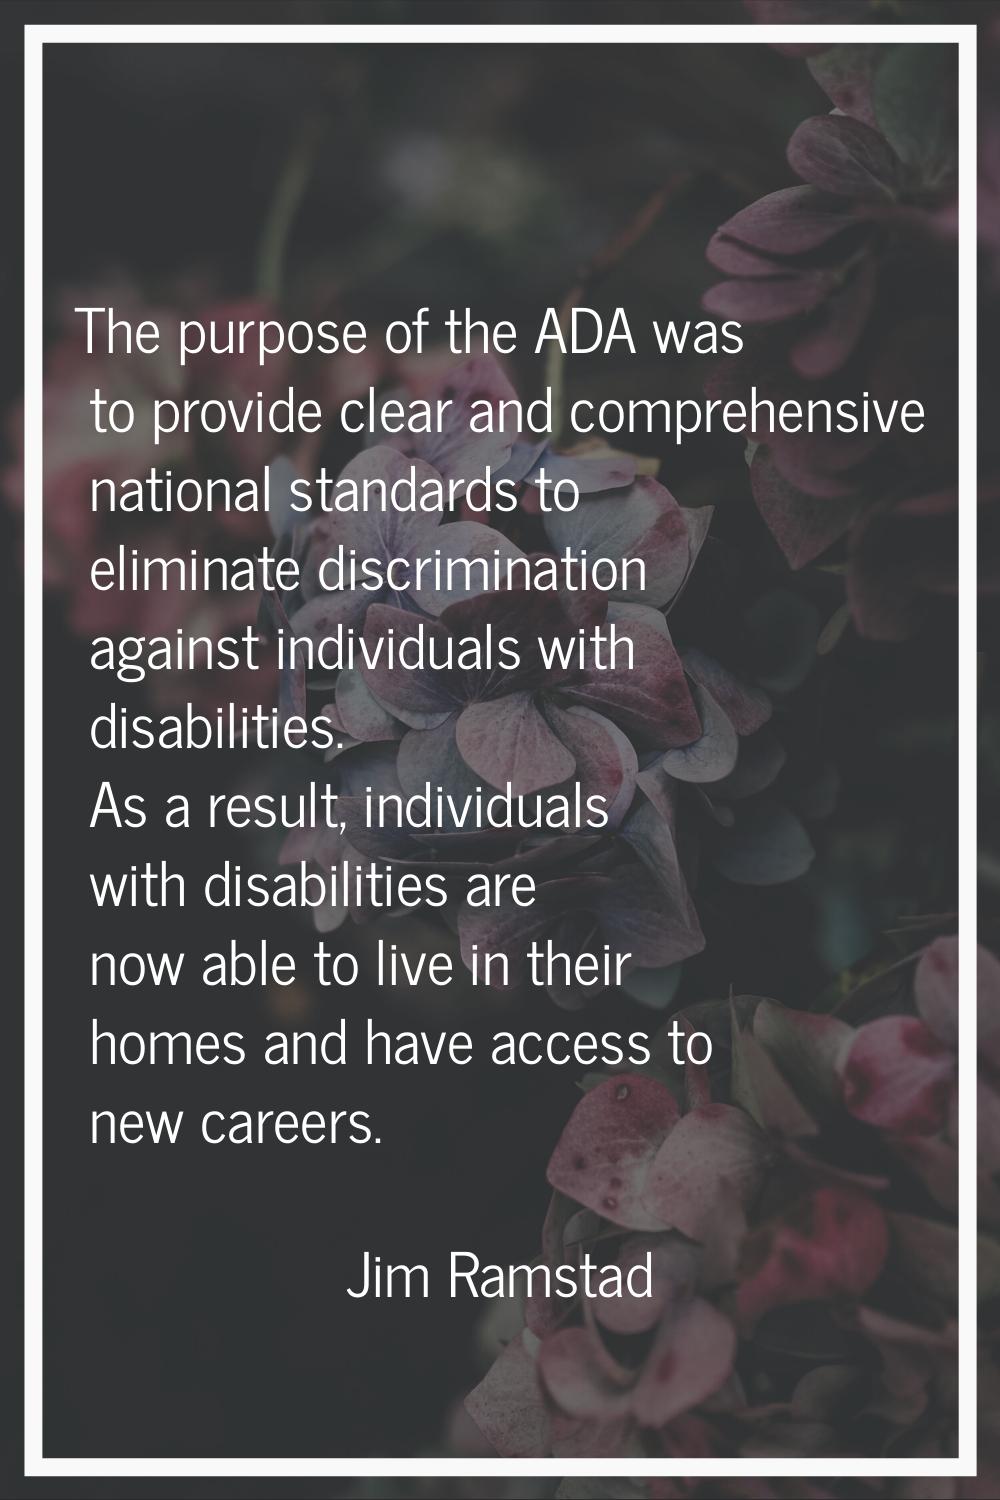 The purpose of the ADA was to provide clear and comprehensive national standards to eliminate discr